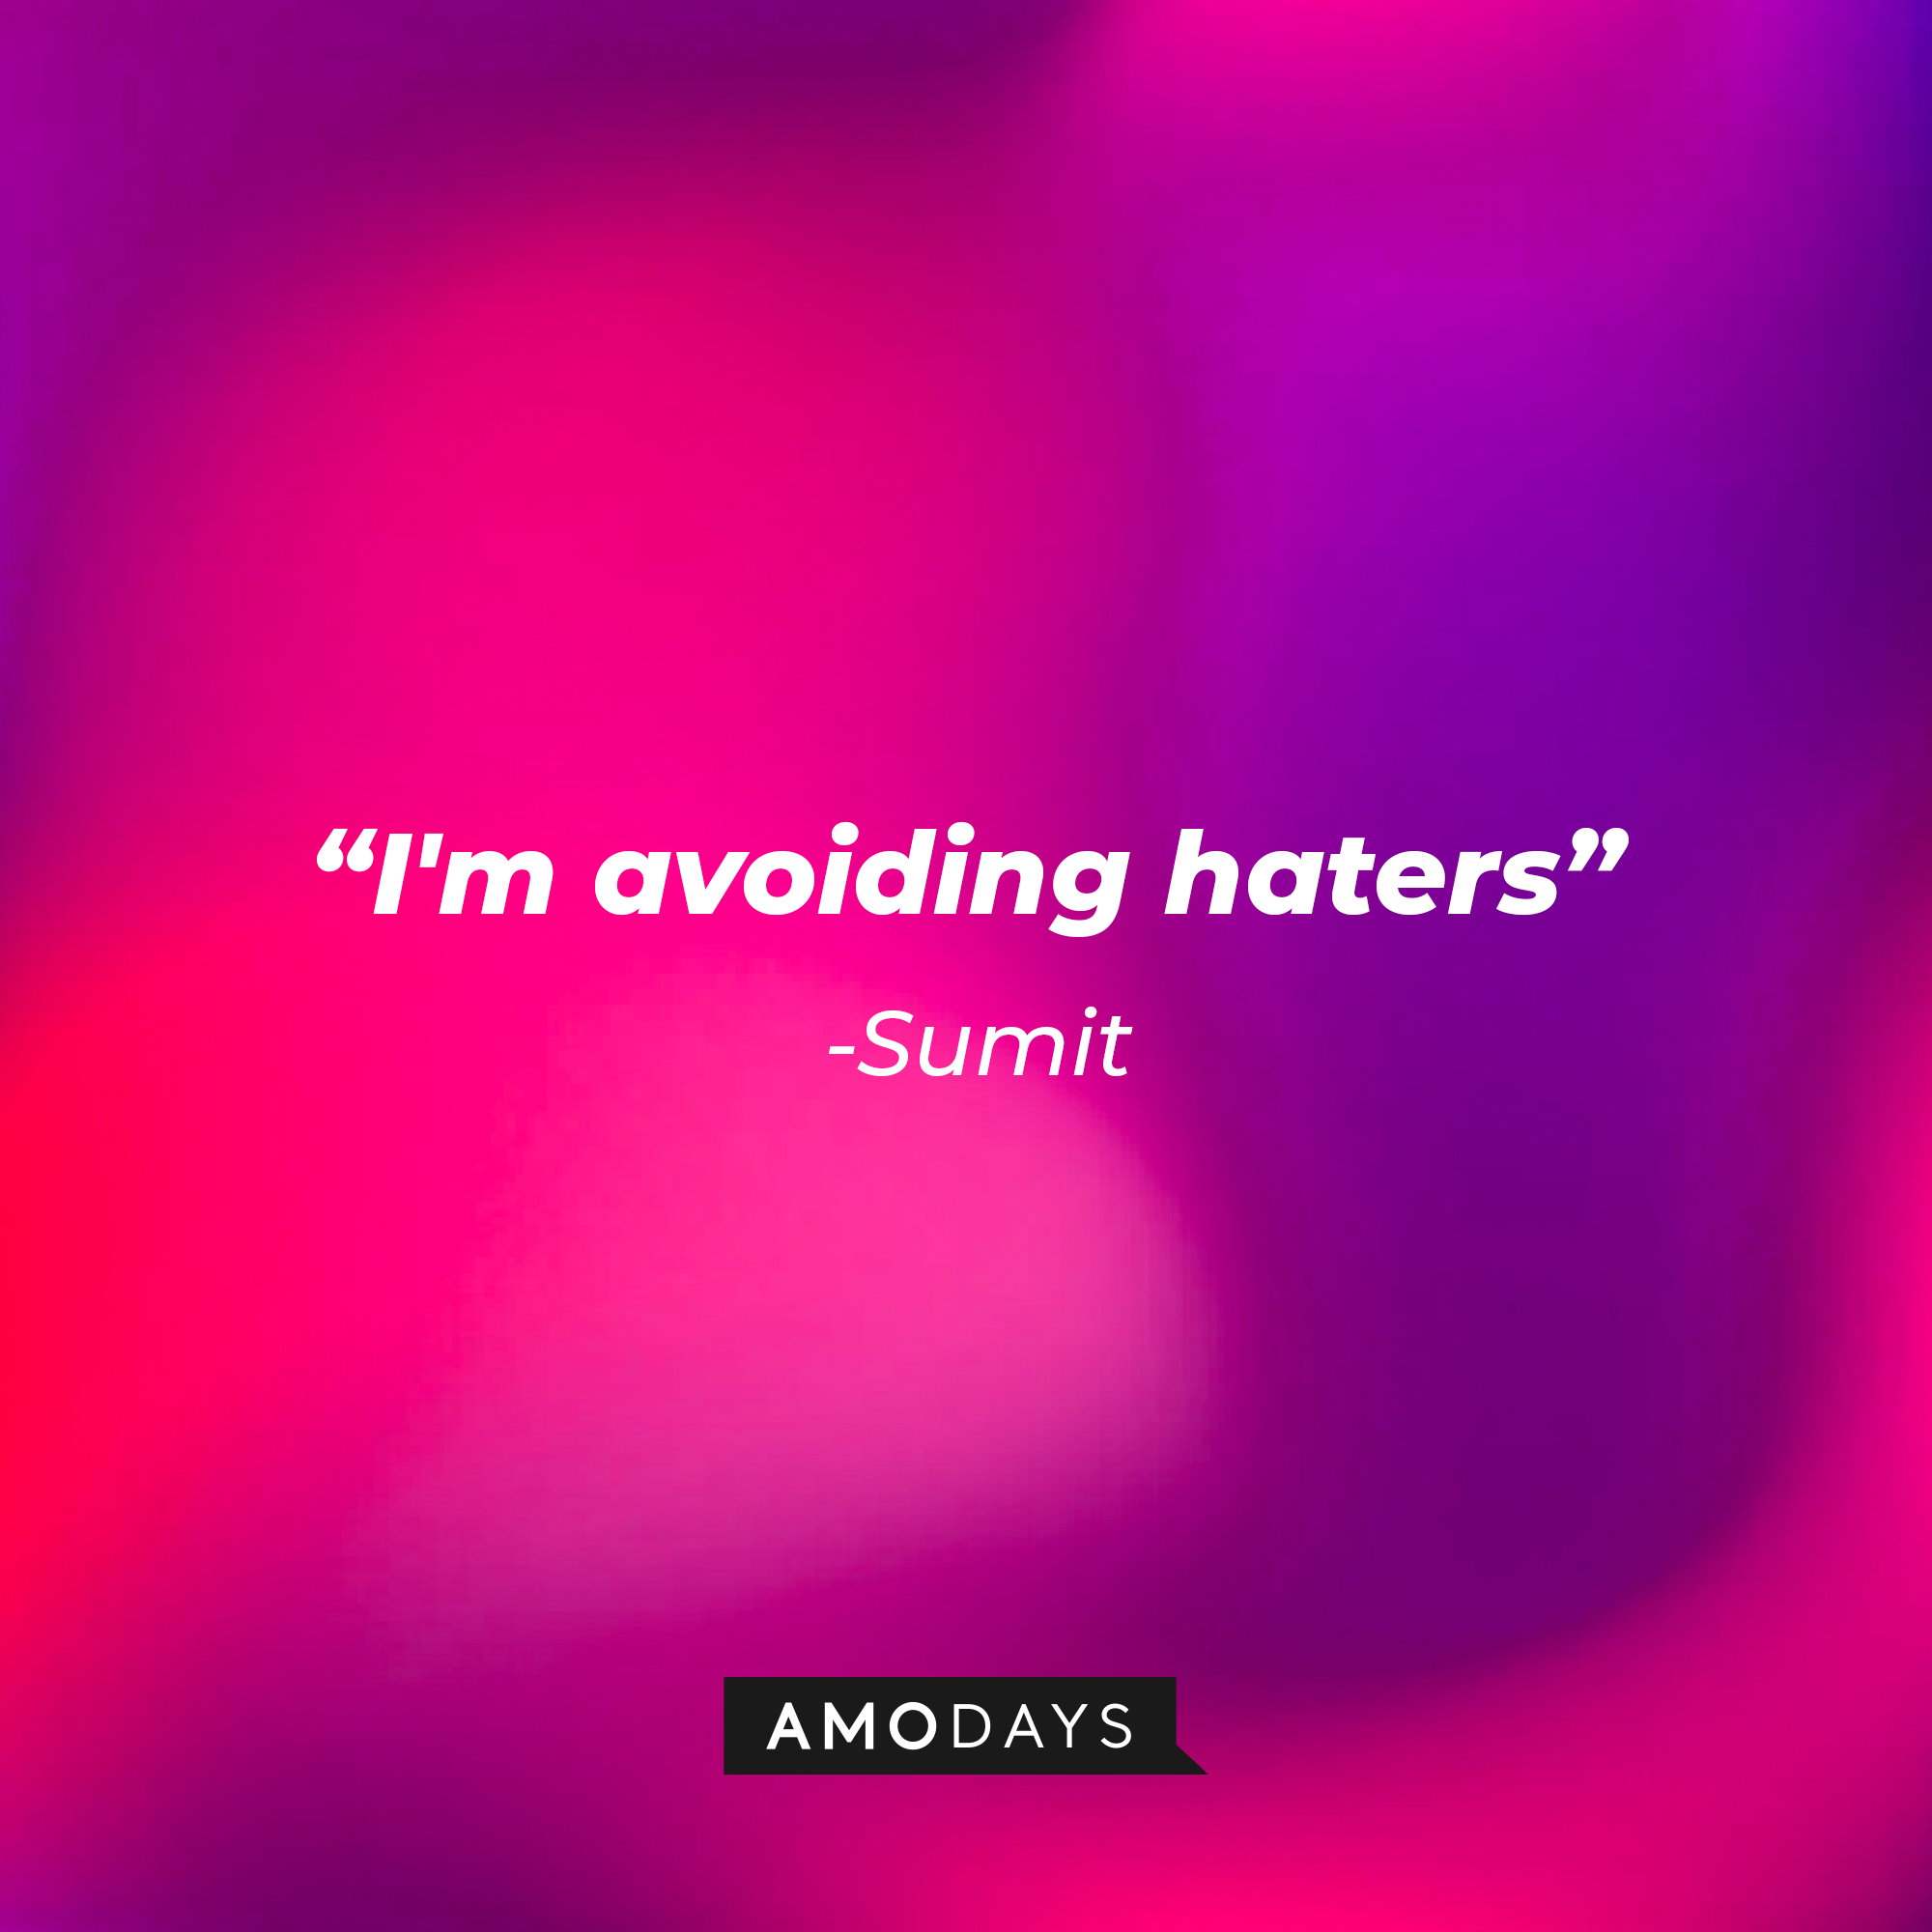 Sumit's quote: "I'm avoiding haters" | Source: Amodays